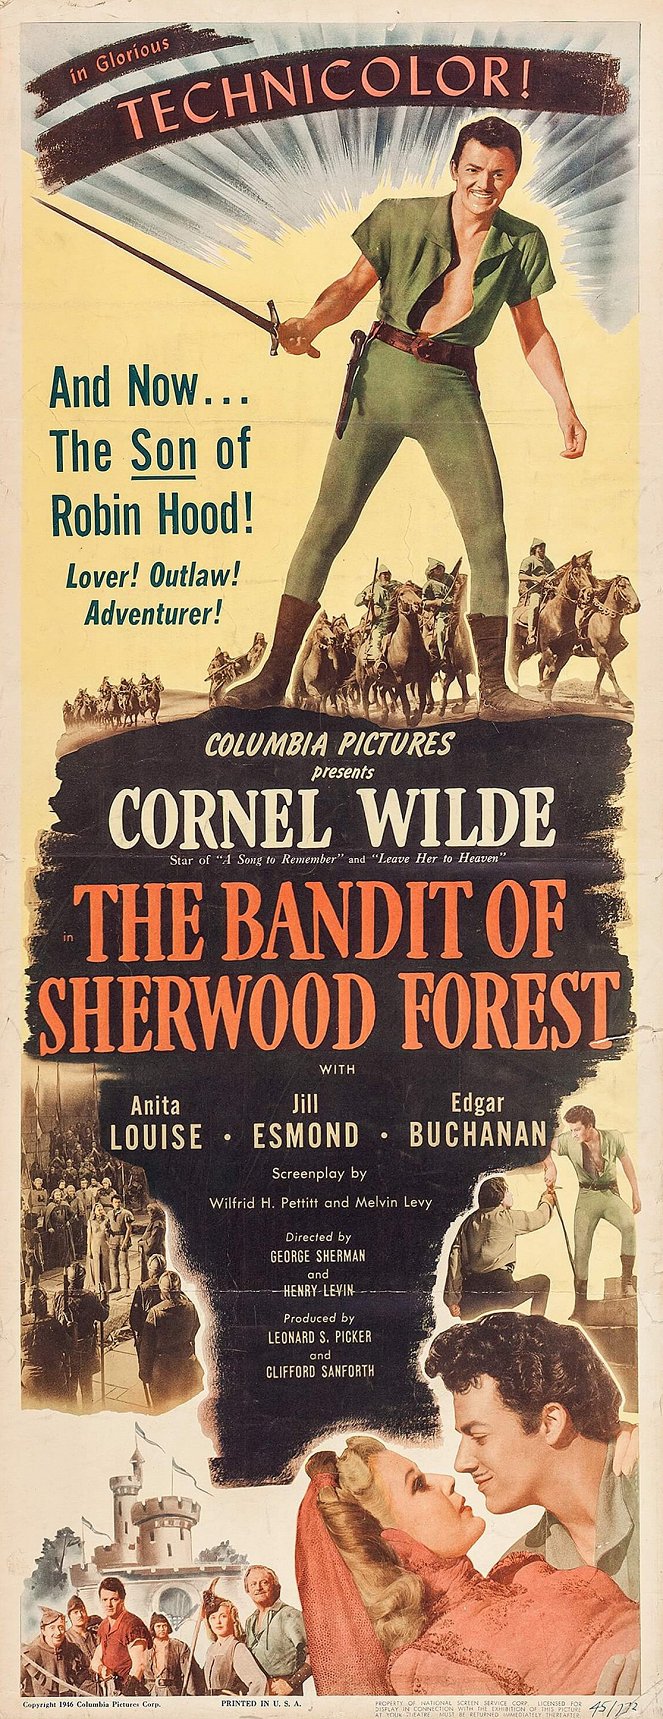 The Bandit of Sherwood Forest - Posters